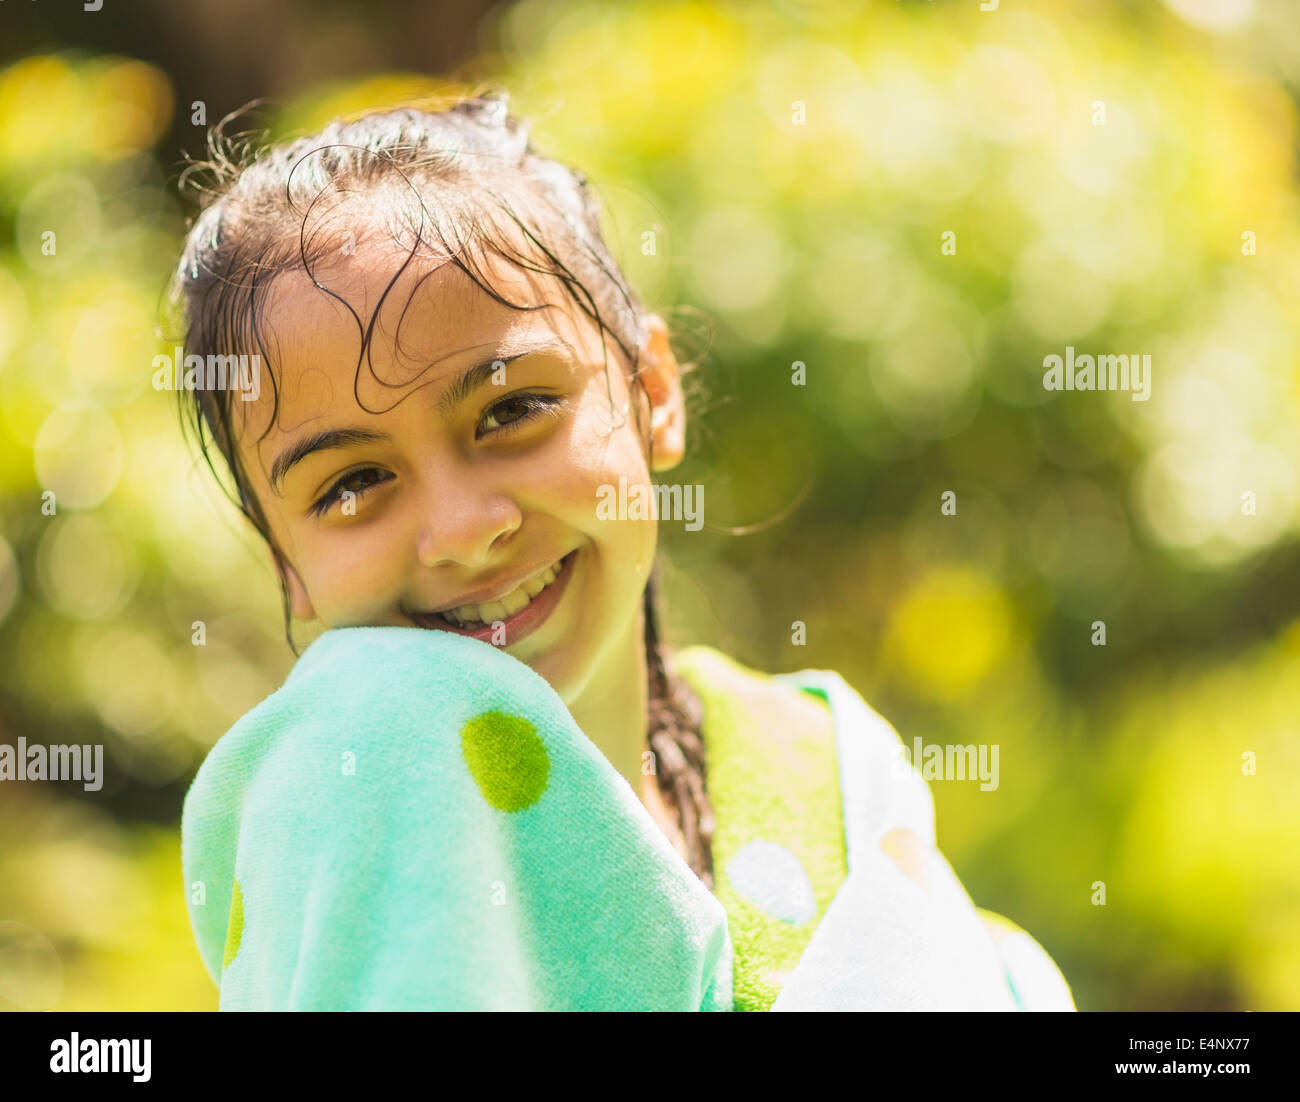 Portrait of girl (8-9) with wet hair Stock Photo